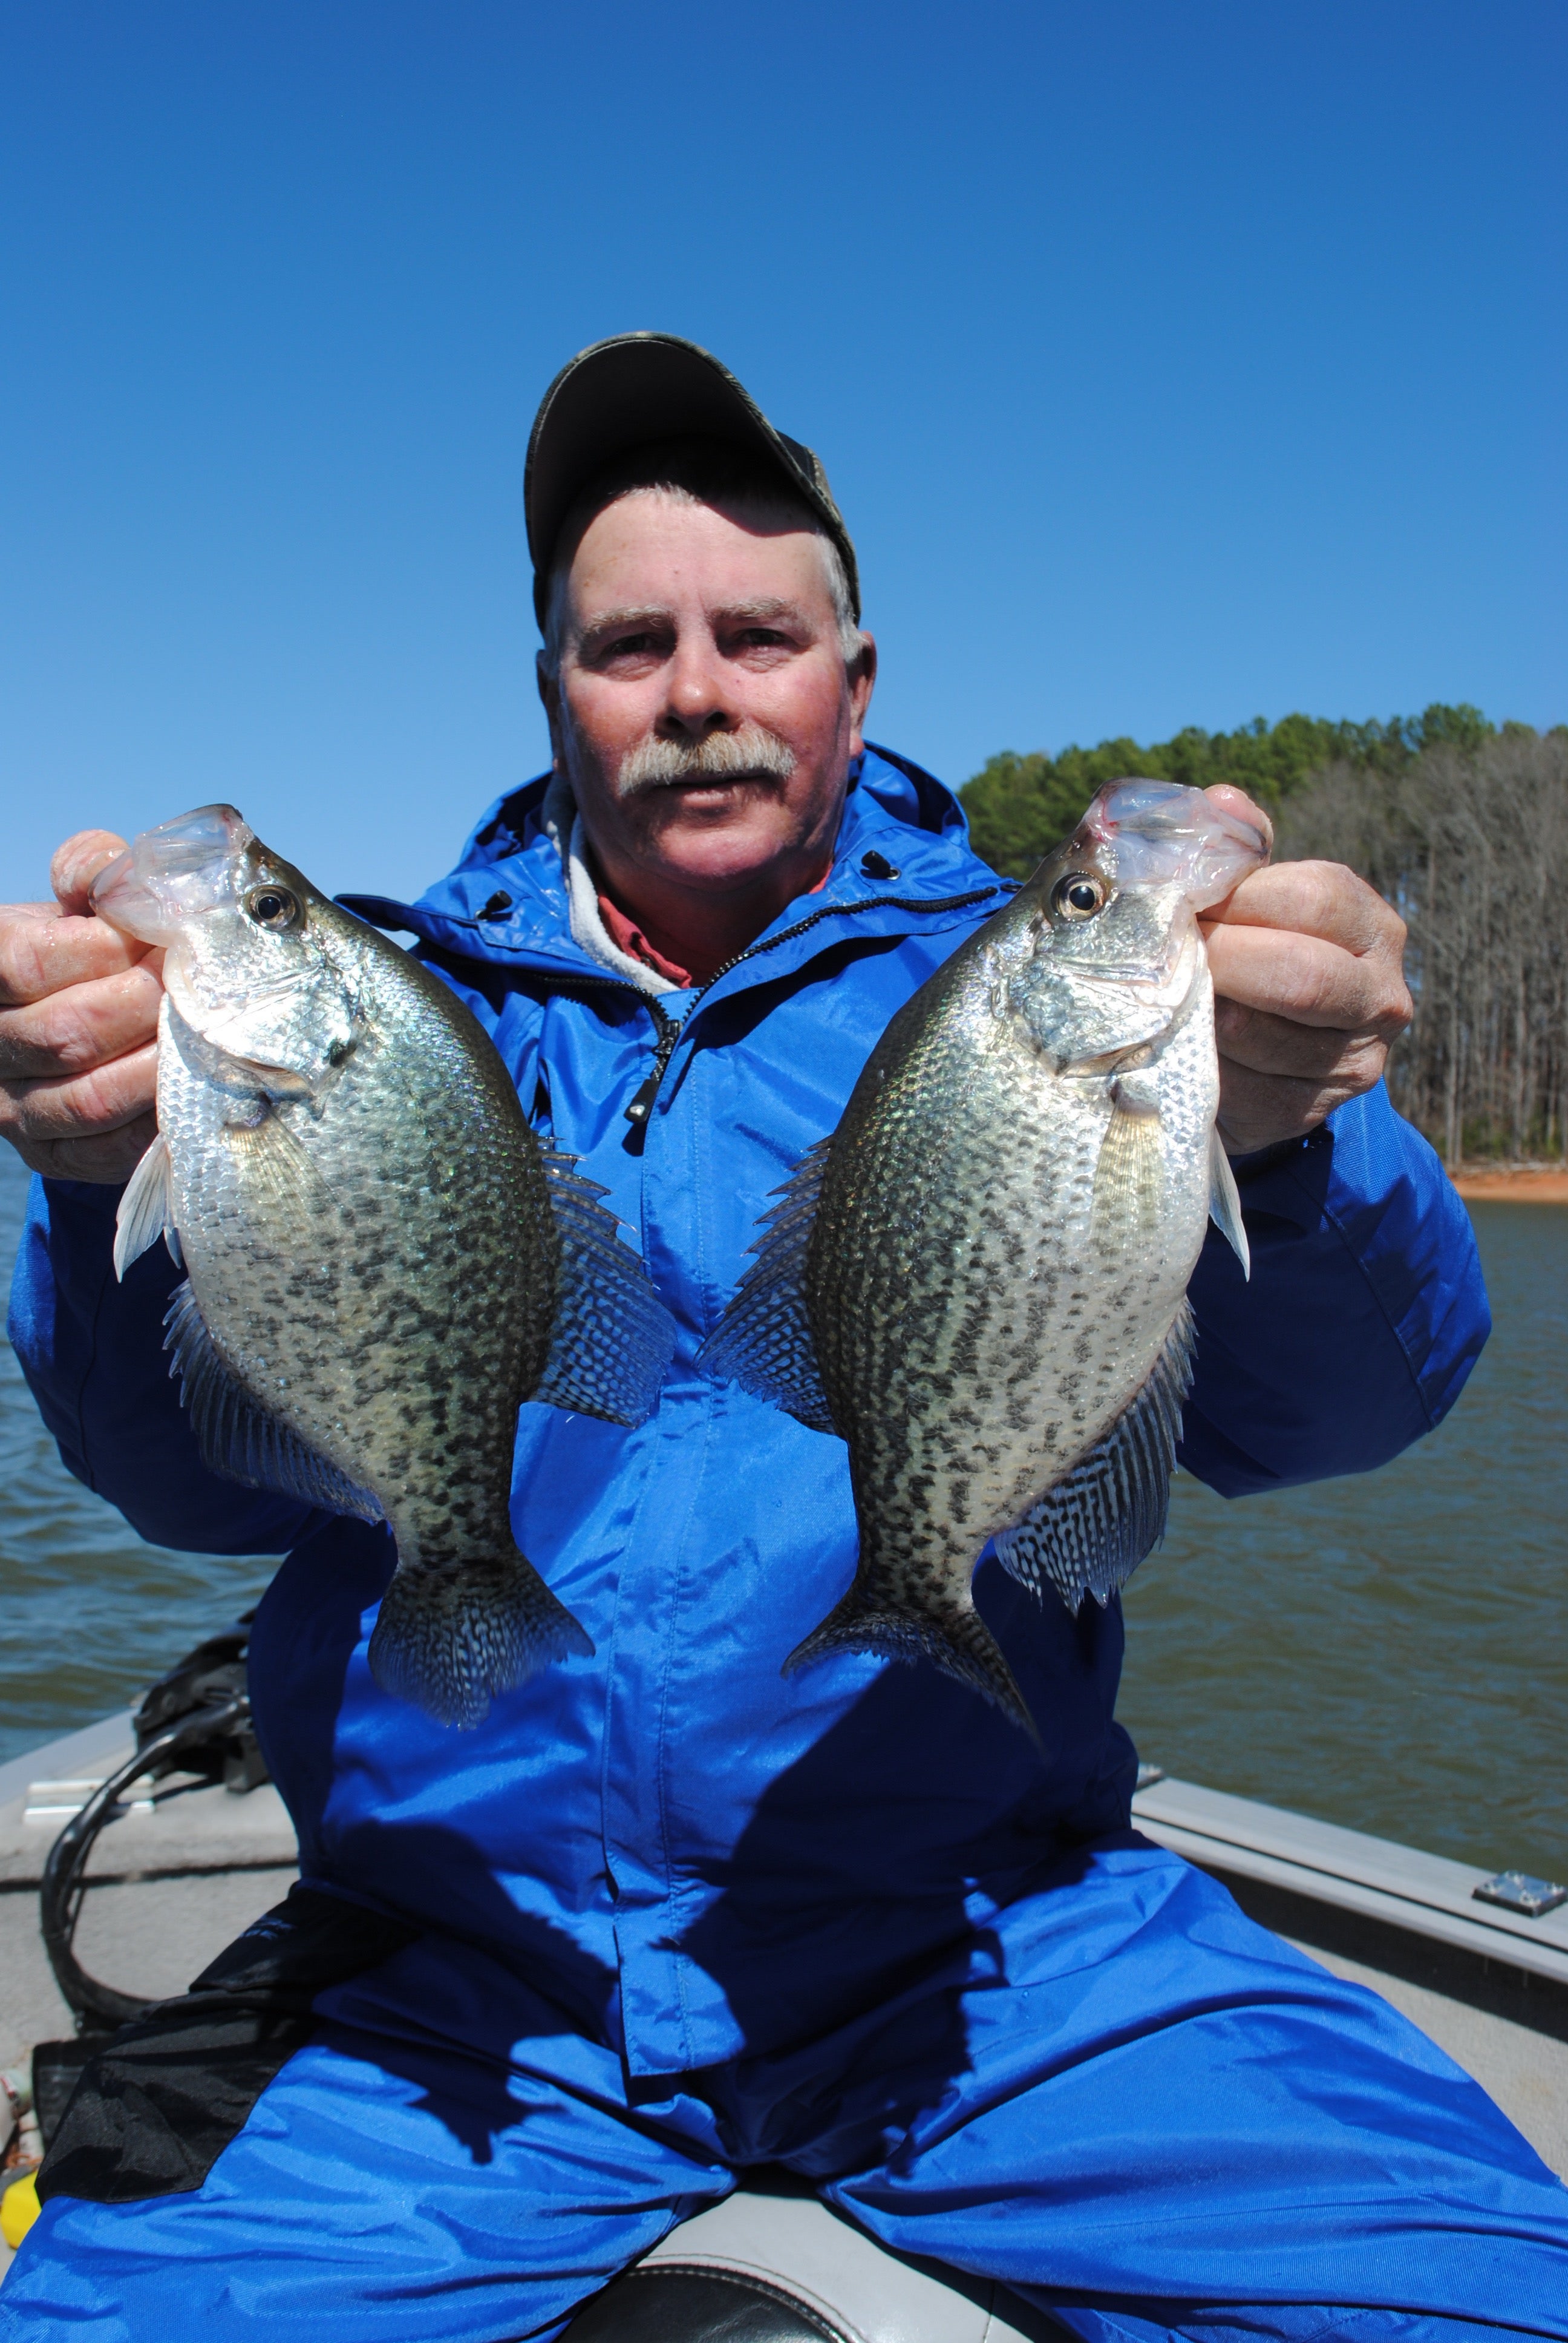 Wanna step outside? Crappie are a great fish to target year-round